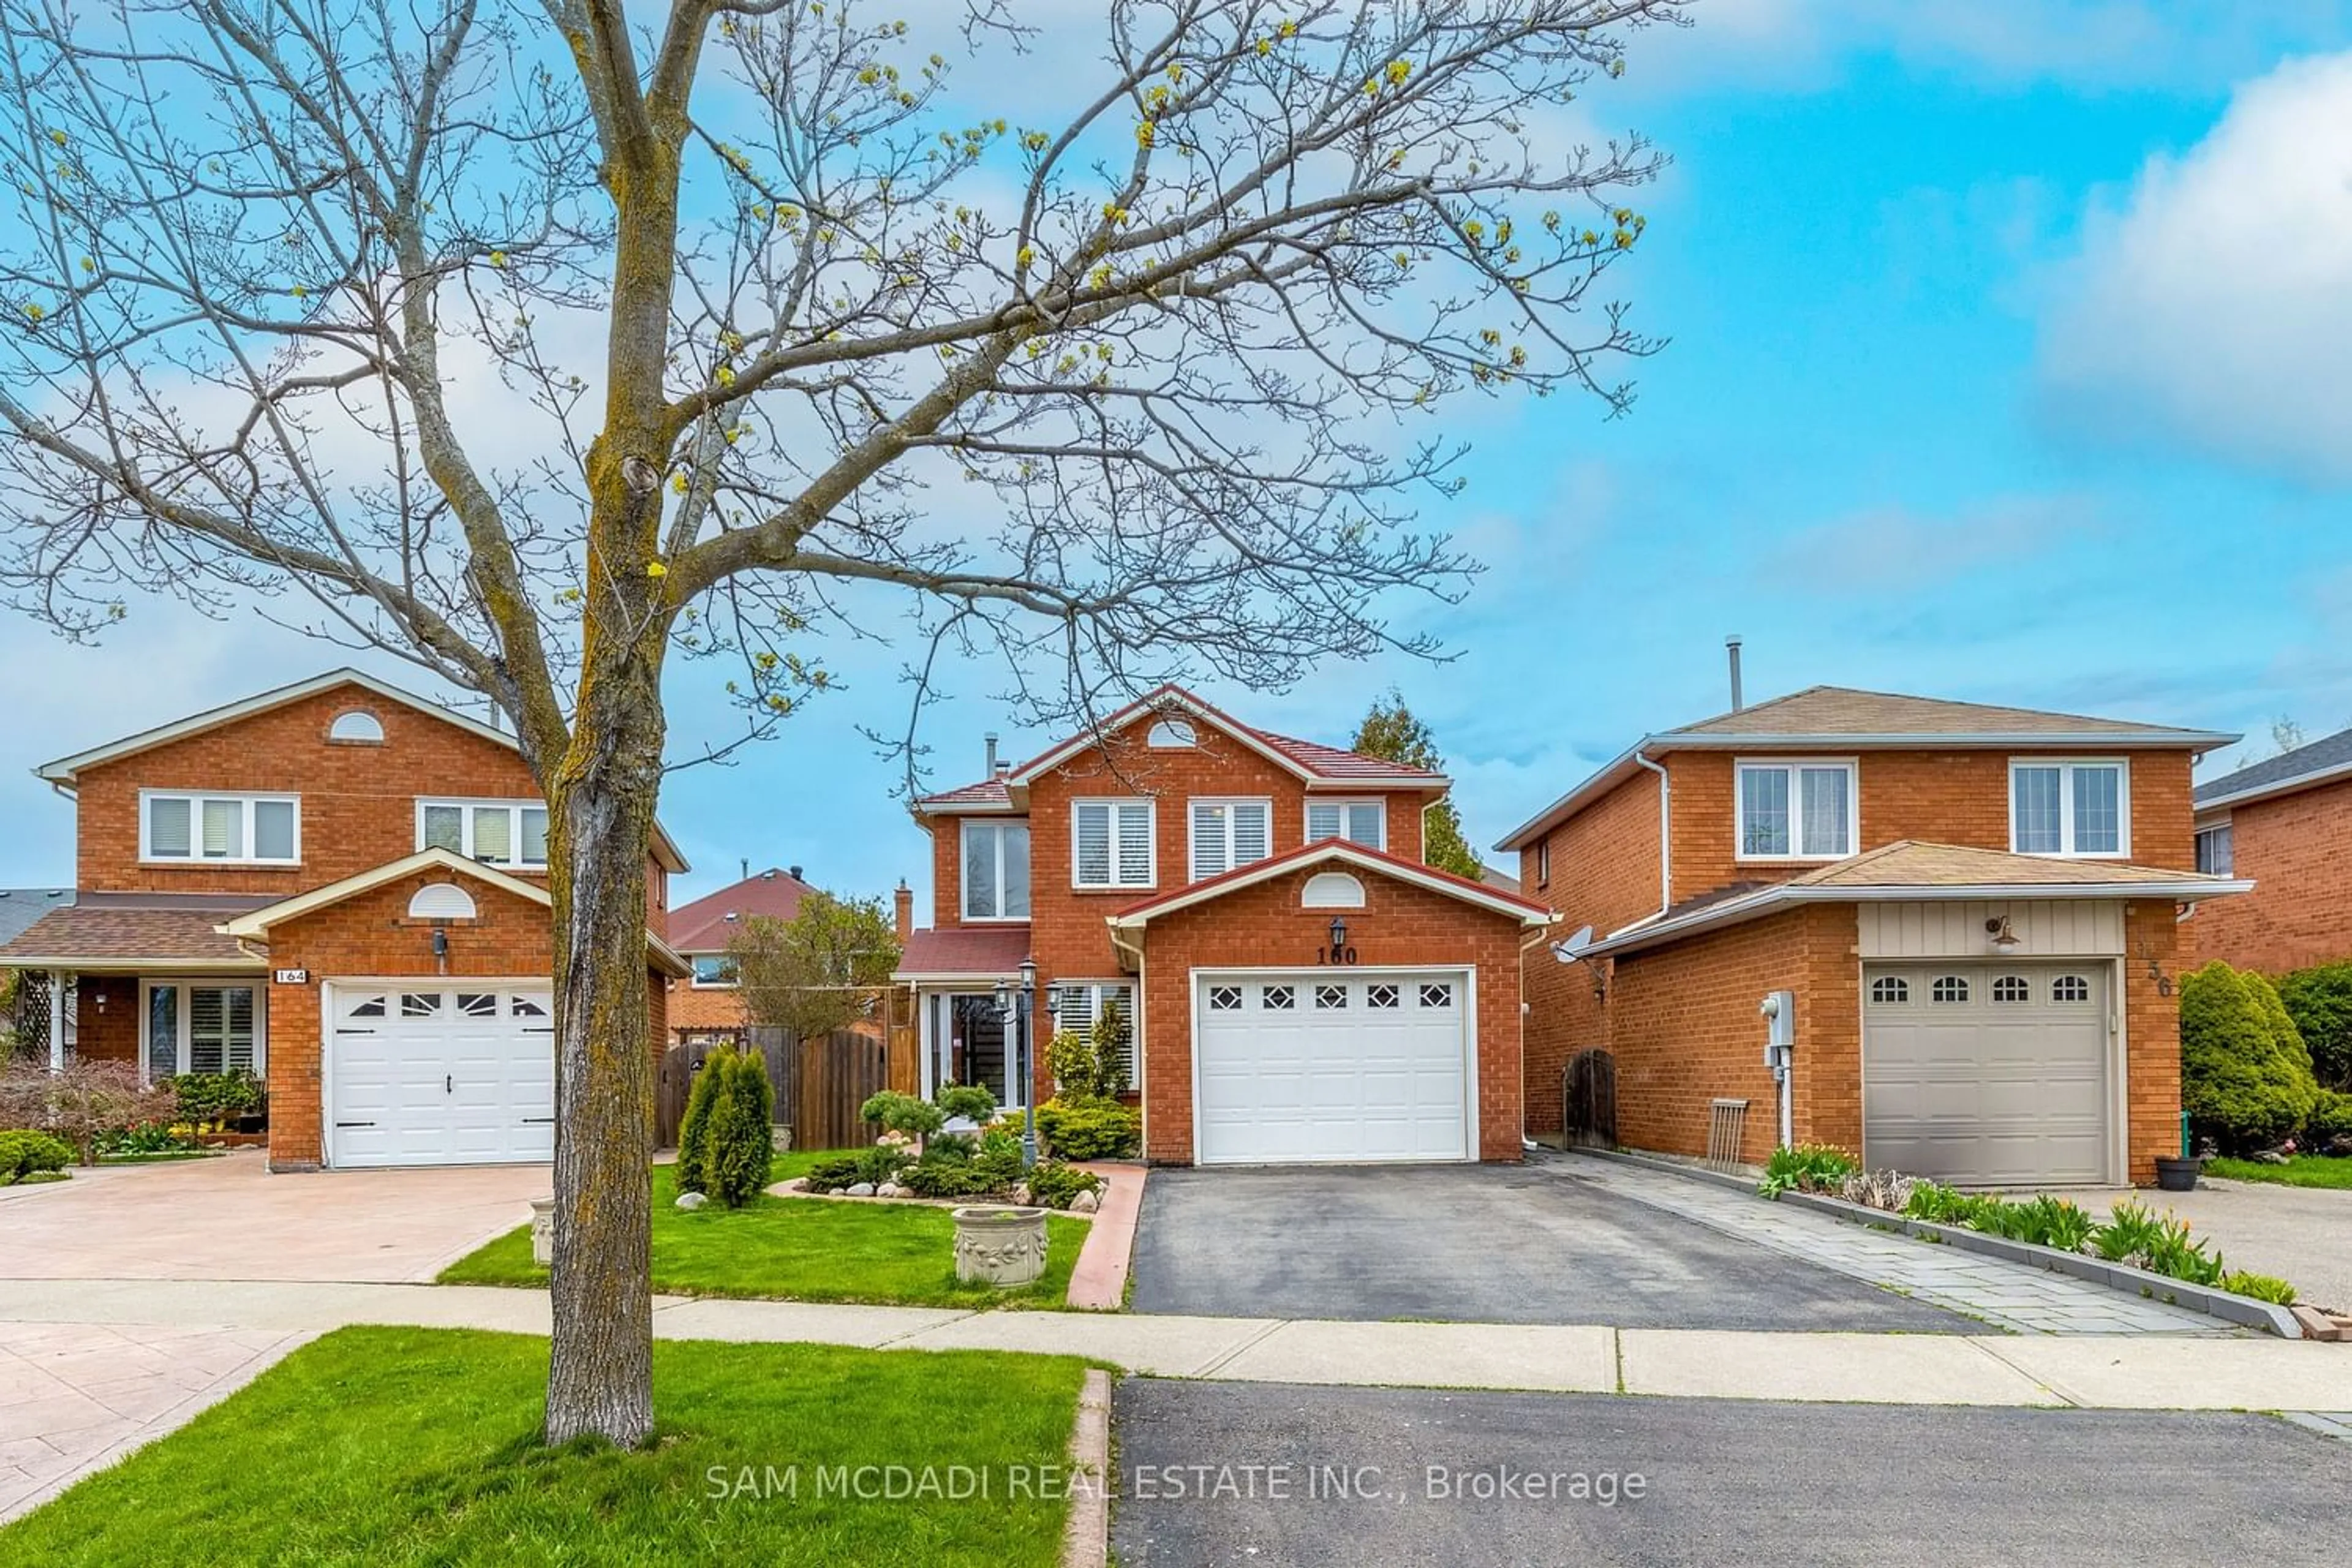 Home with brick exterior material for 160 Tuscadero Cres, Mississauga Ontario L4Z 3C1